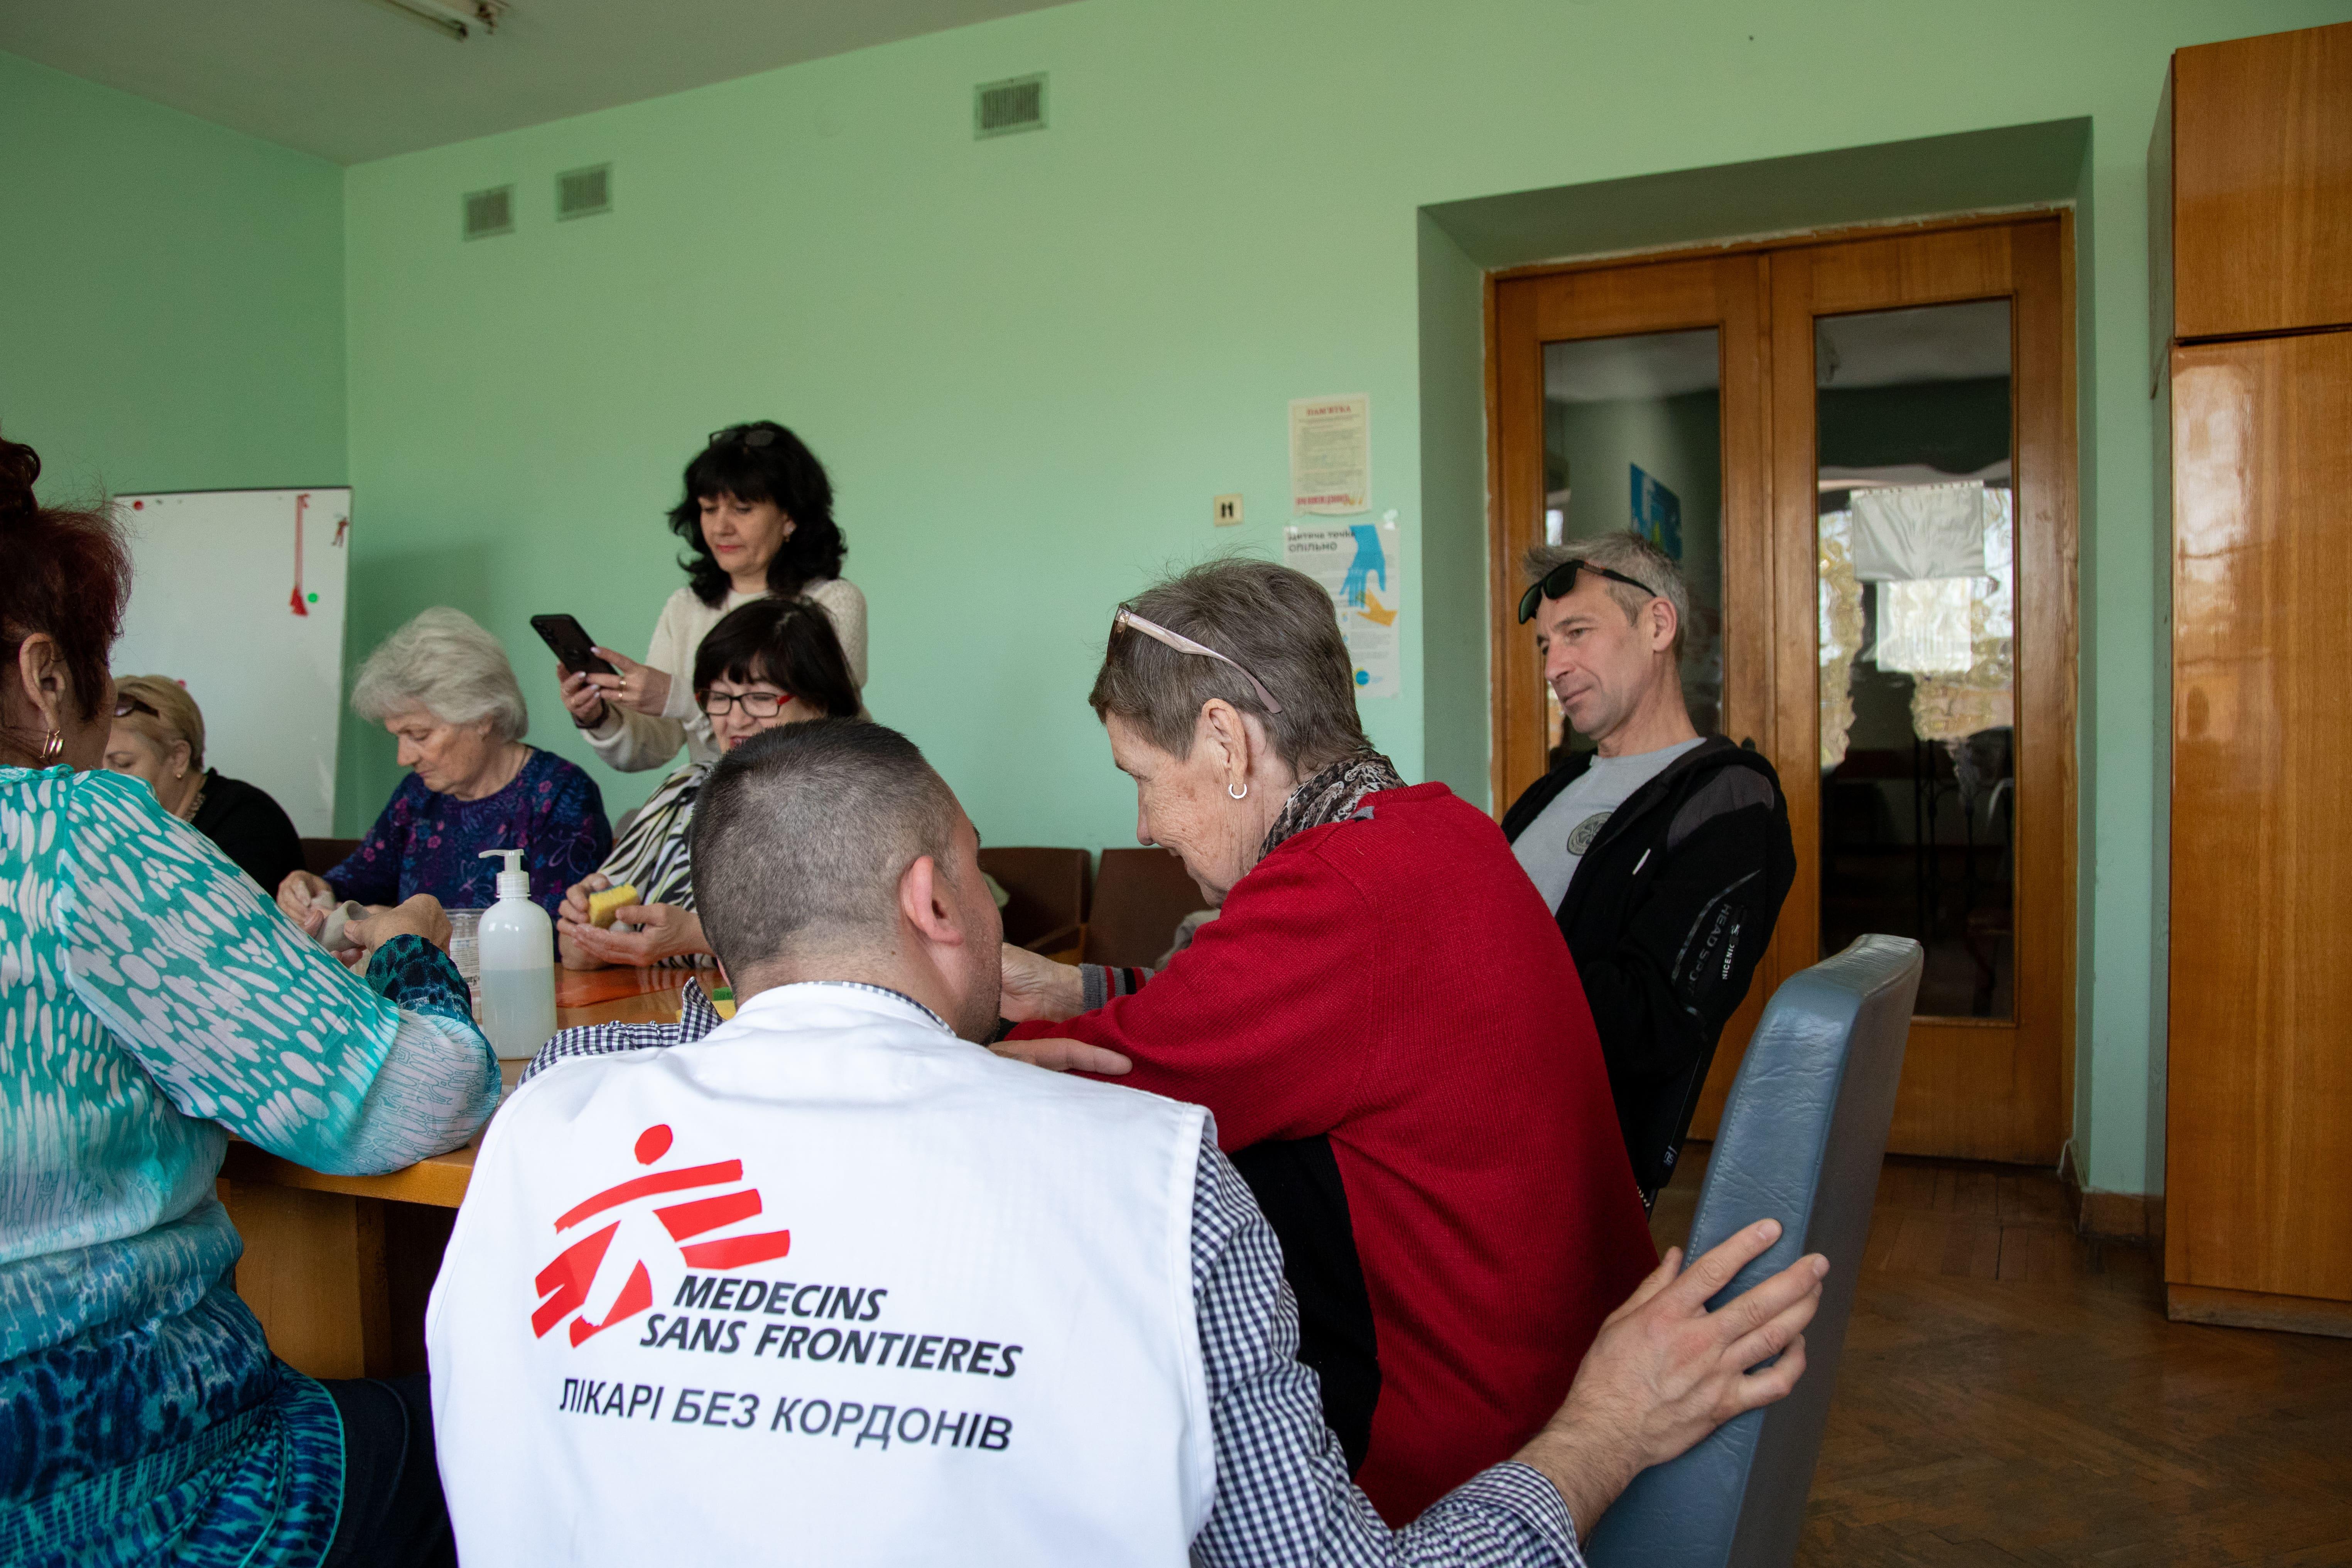 Psychological Support in Ukraine: During a health promotion session, Oleh Pohrebniak, MSF health promoter, talks to Lidia Bazualyeva, an MSF discharged patient who had celebrated her 74th birthday the day before.